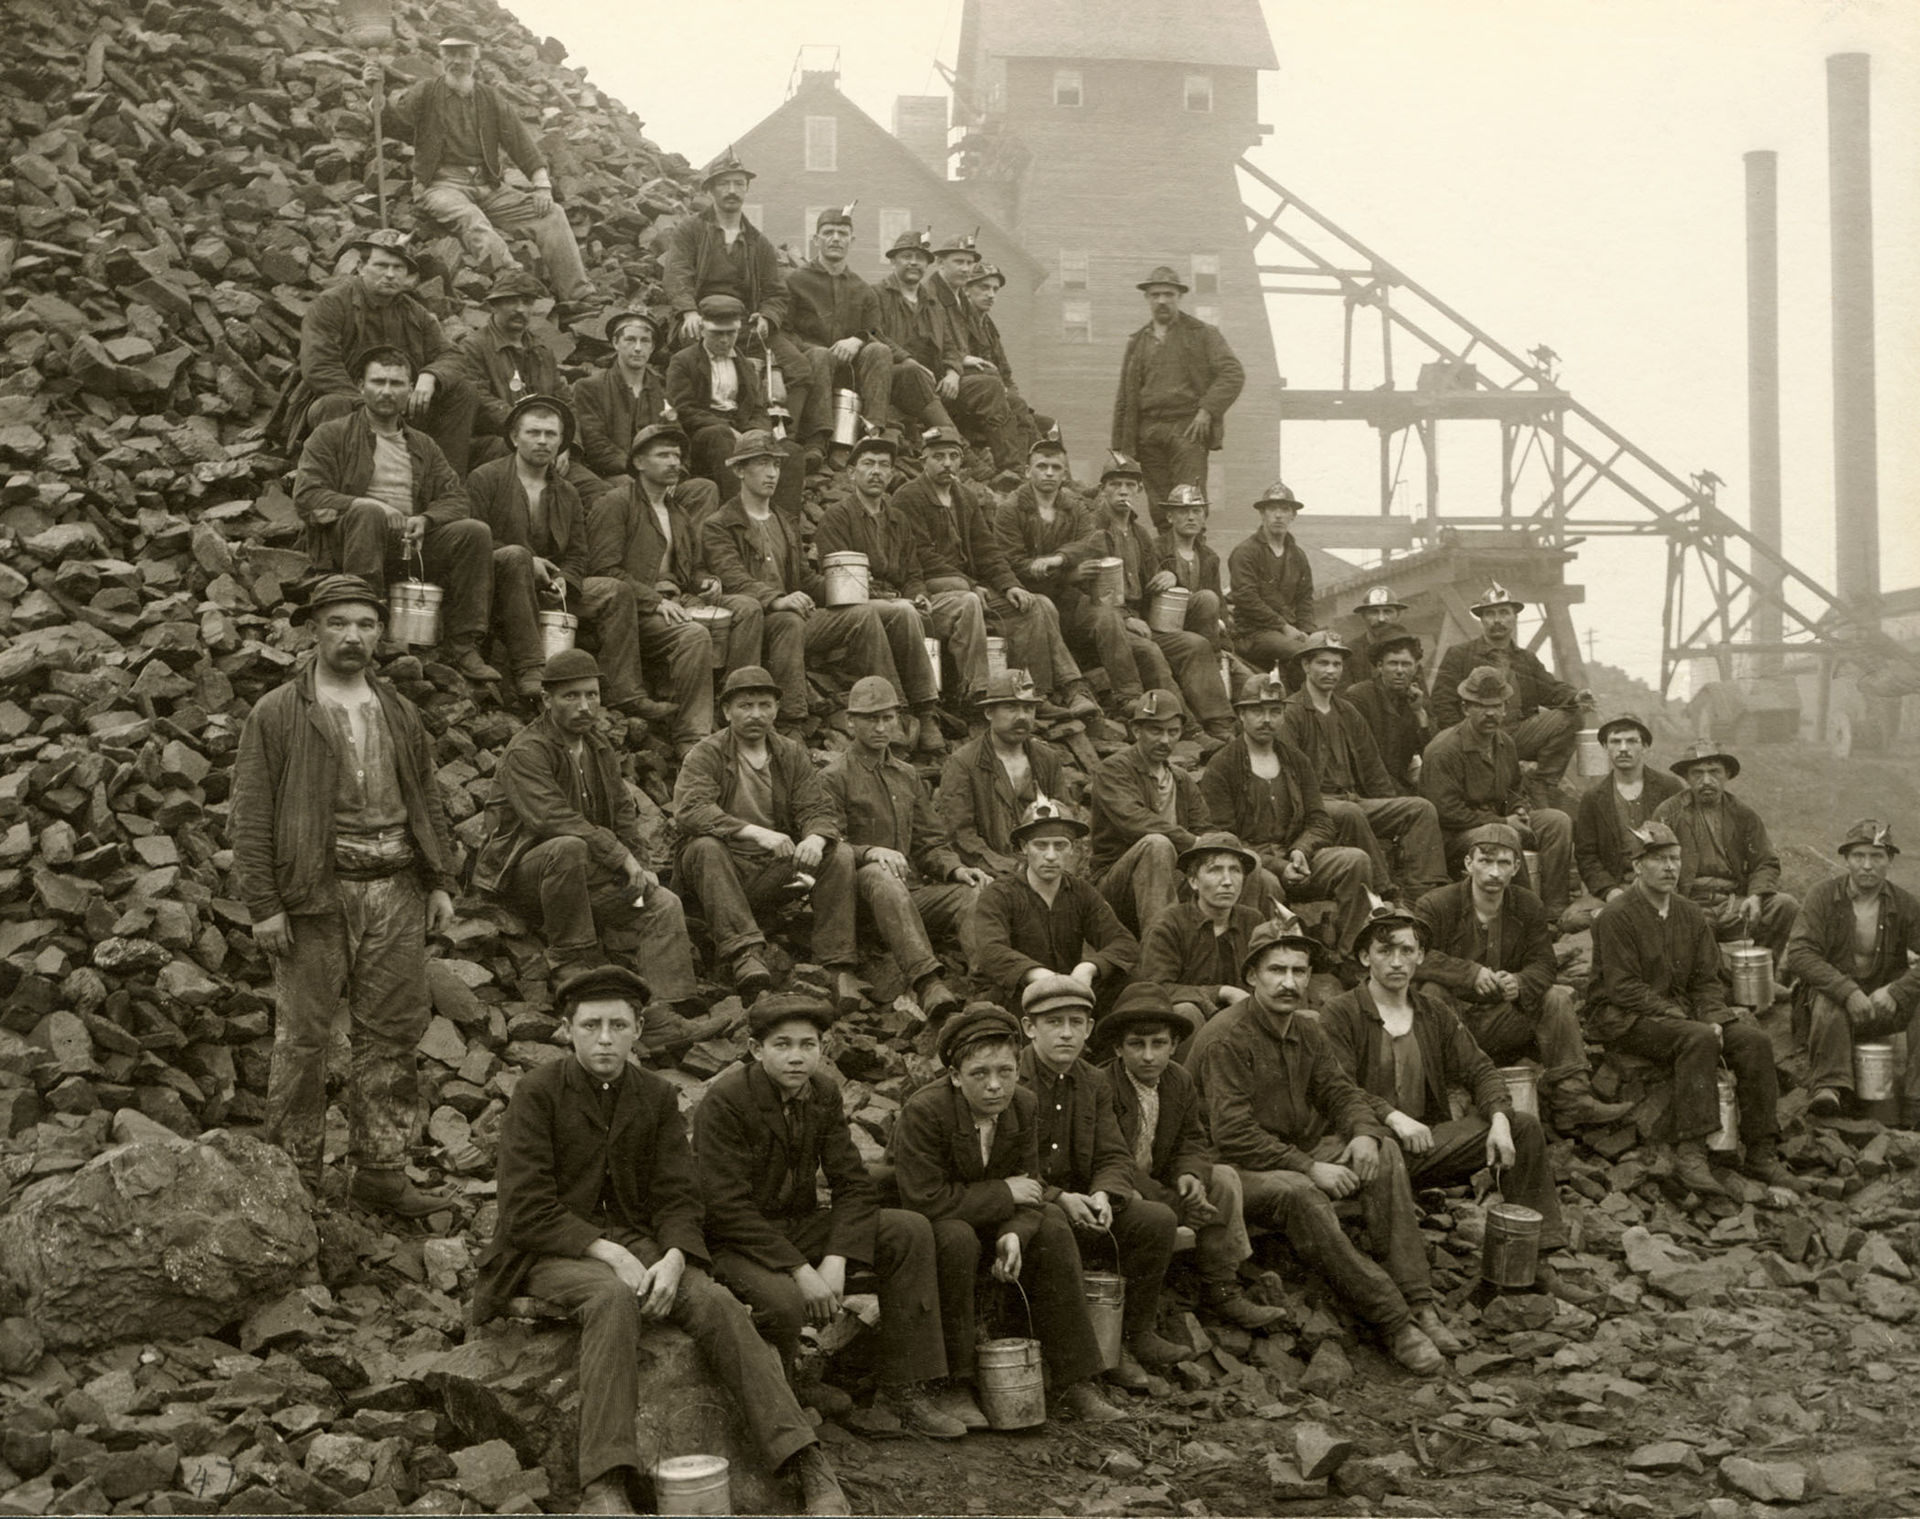 Miners posing next to rocks in 1905